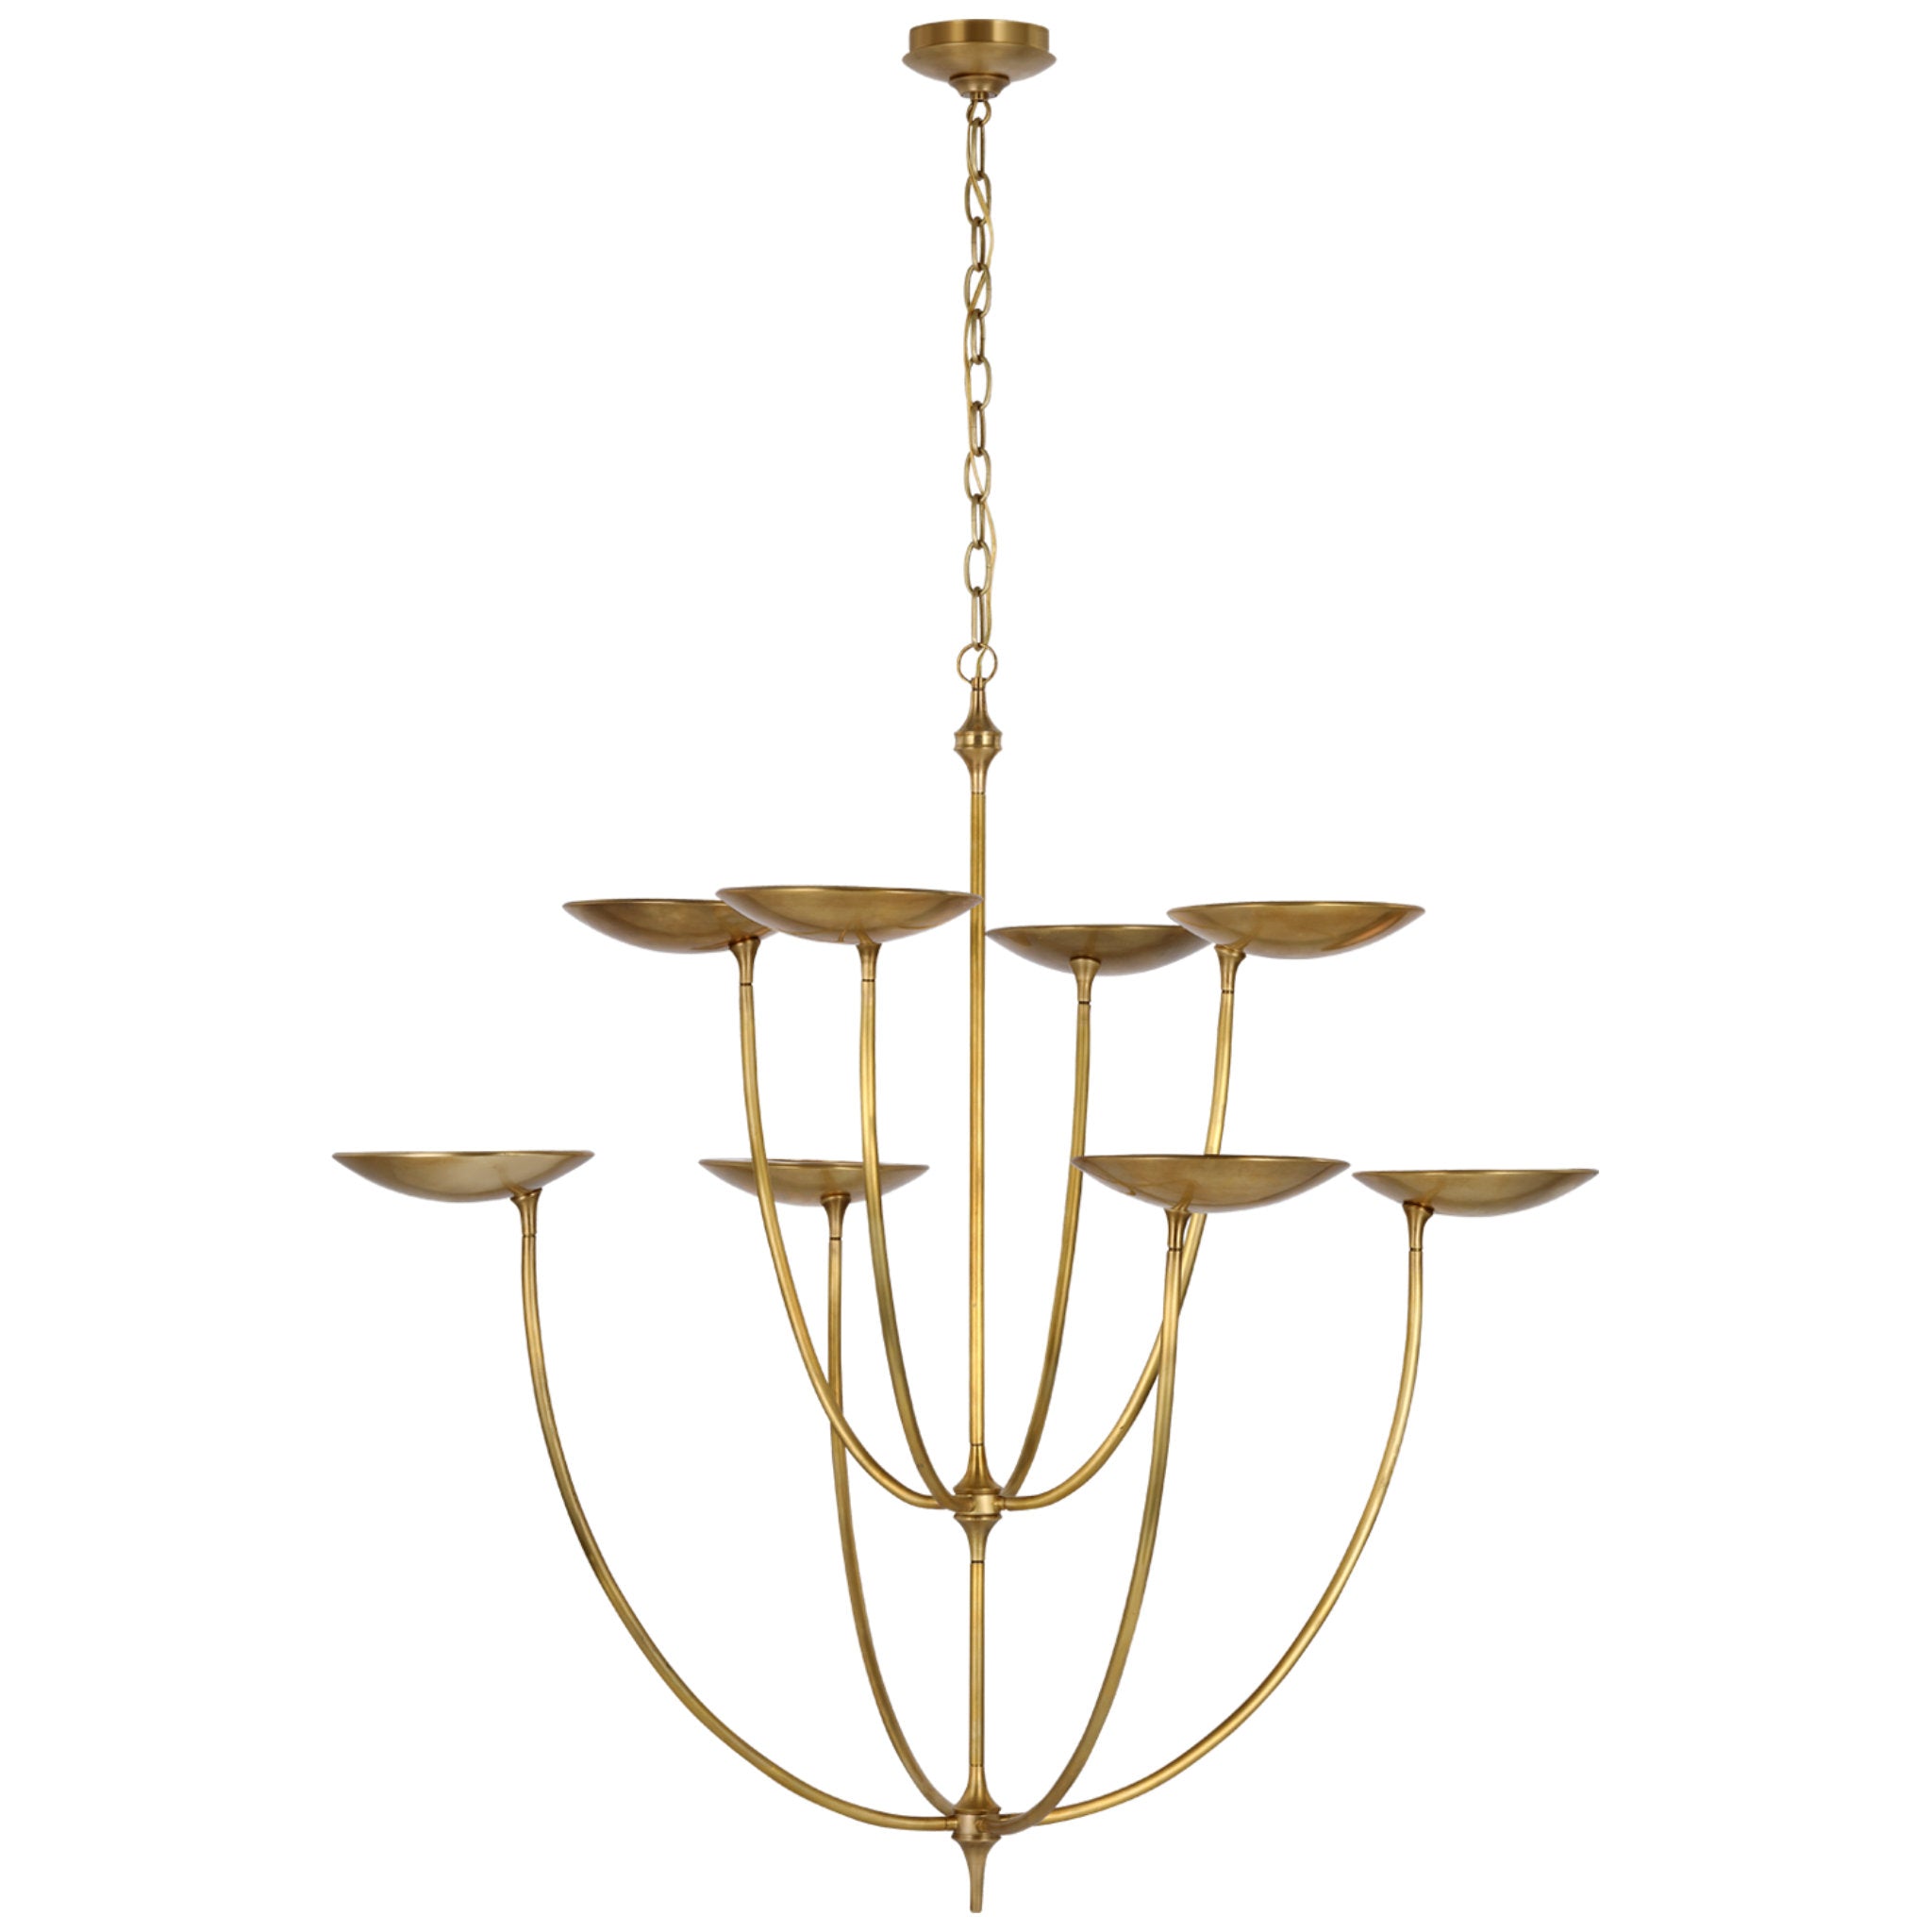 Thomas O'Brien Keira XL Chandelier in Hand-Rubbed Antique Brass